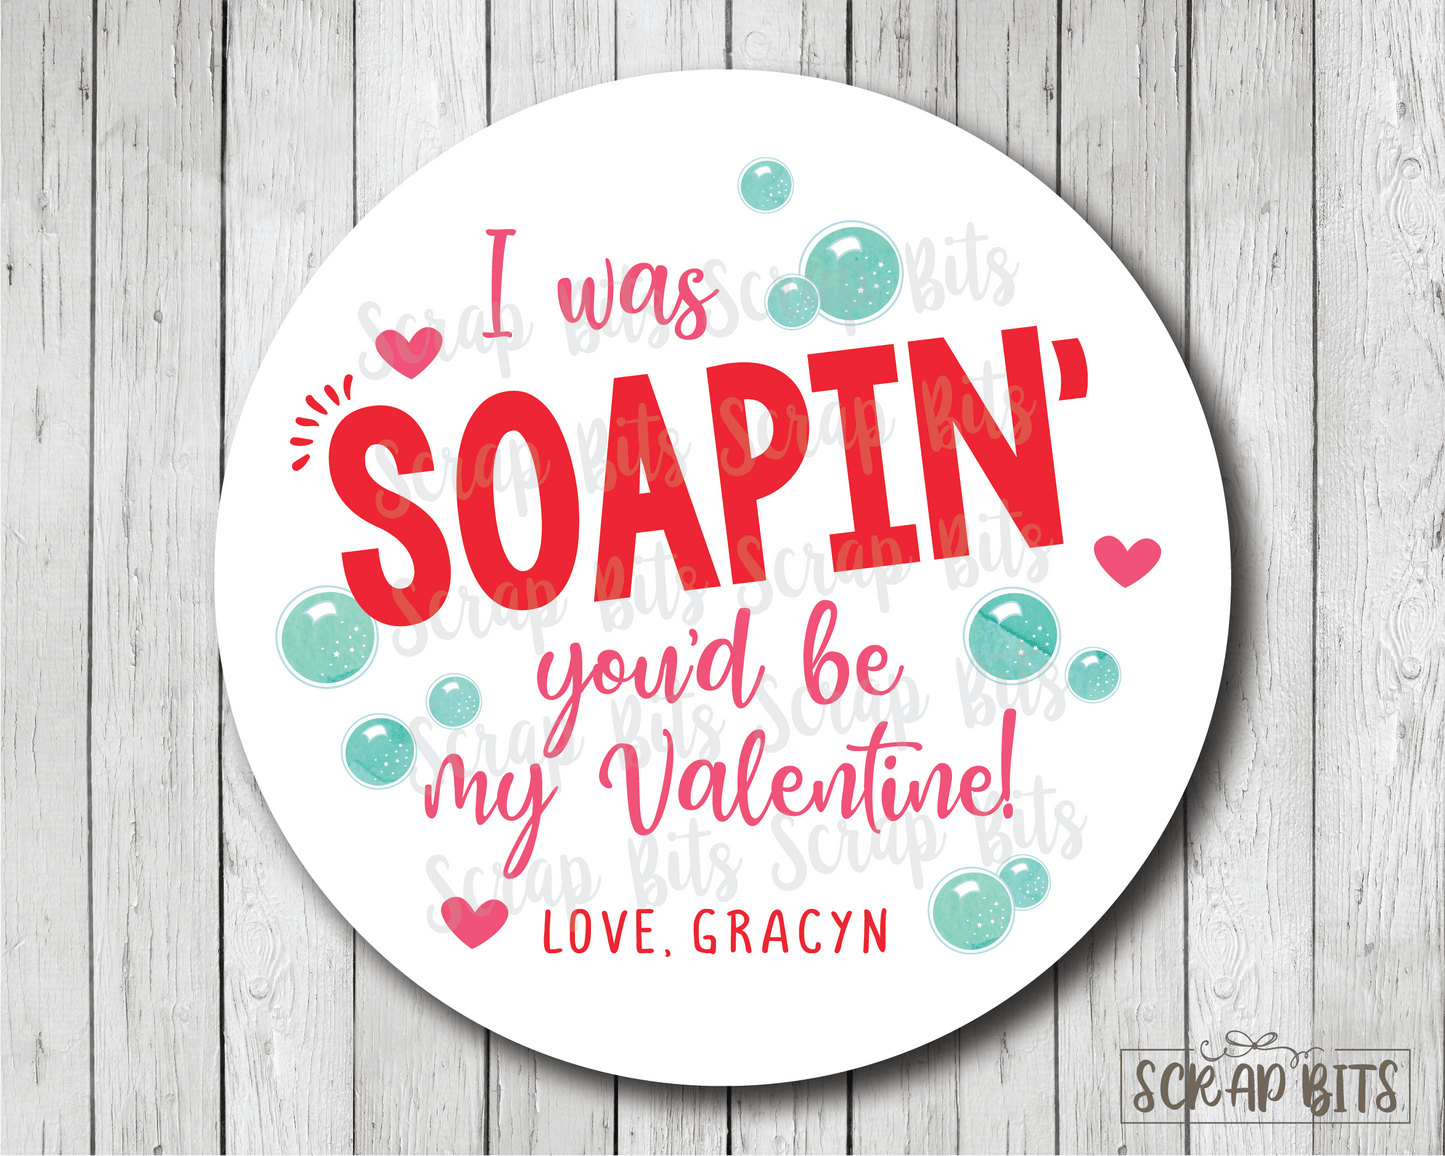 I Was Soapin' You'd Be My Valentine . Soap Valentine's Day Stickers or Tags - Scrap Bits